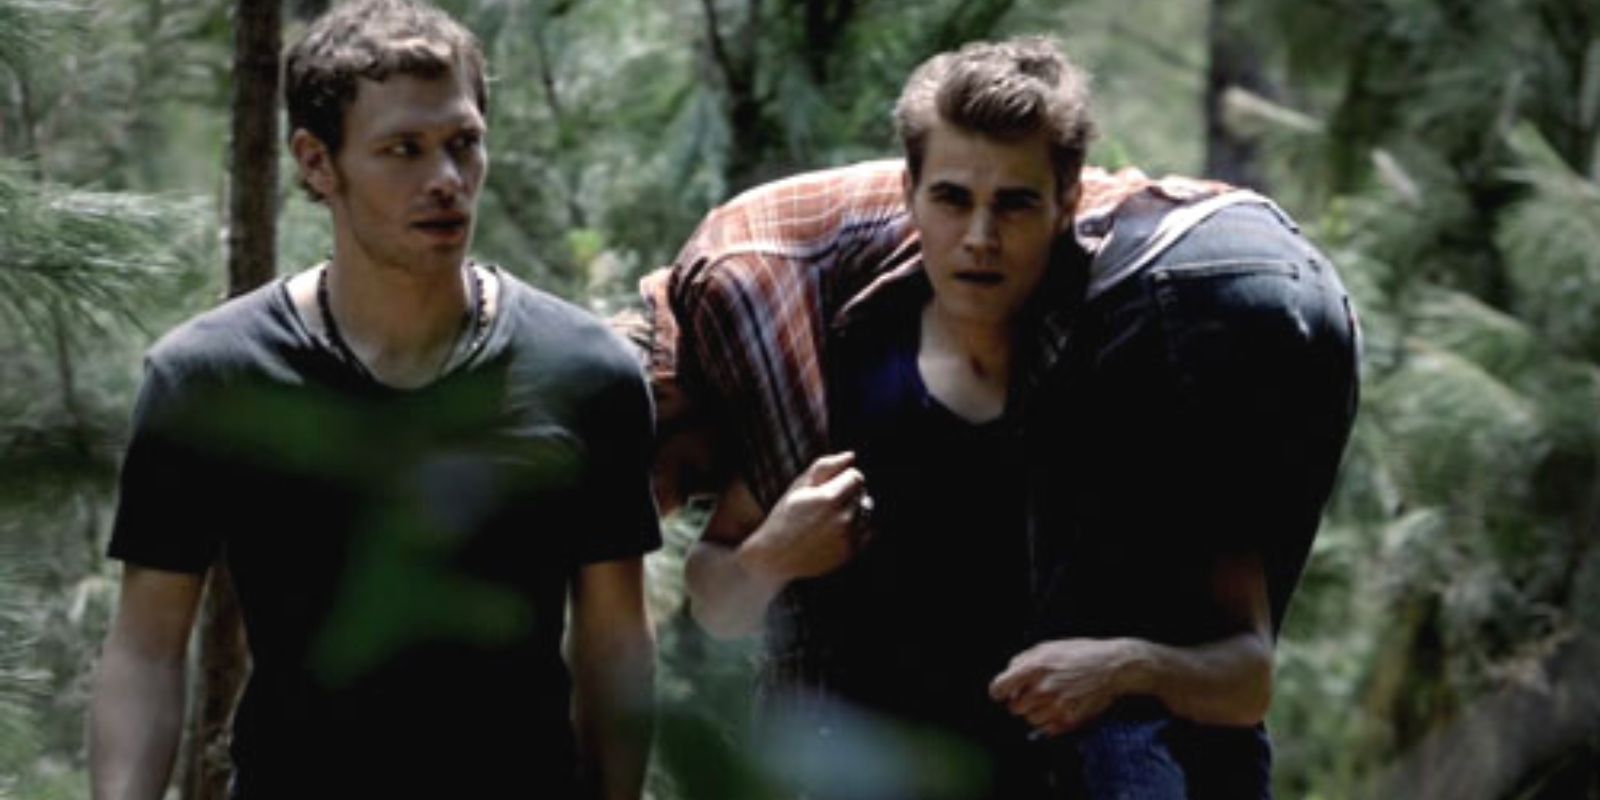 Stefan carries someone in the woods with Klaus